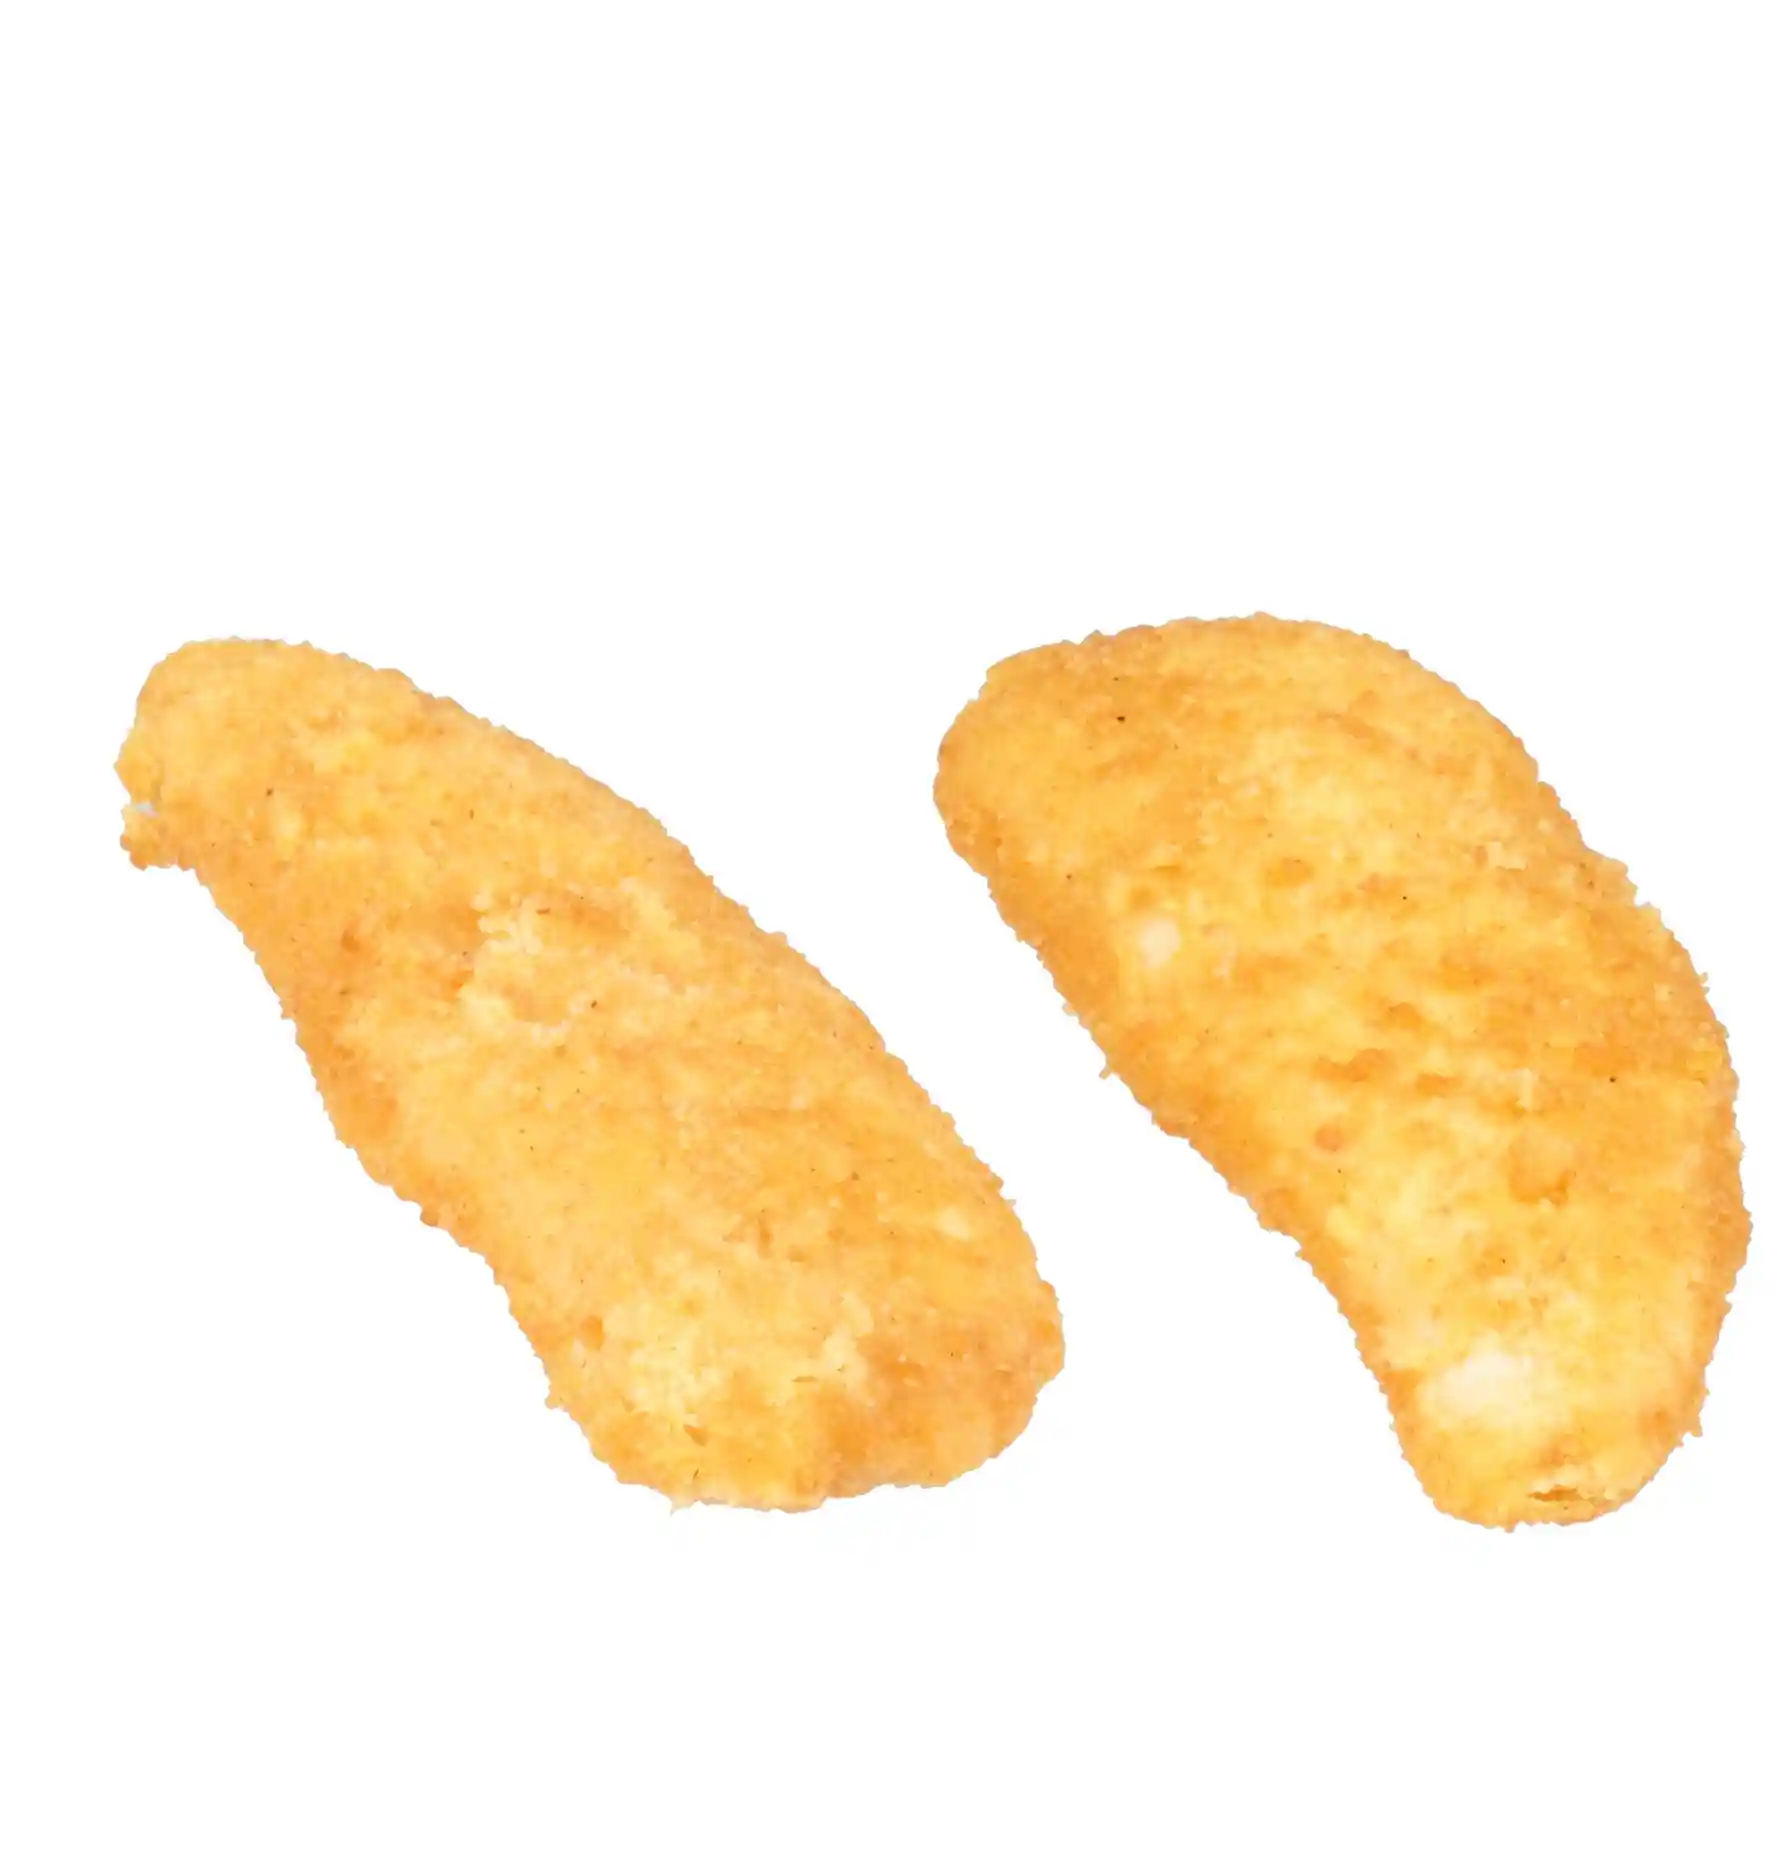 Tyson® Fully Cooked Whole Grain Breaded Golden Crispy Select Cut Chicken Tenders, CN 2.07 oz. _image_11